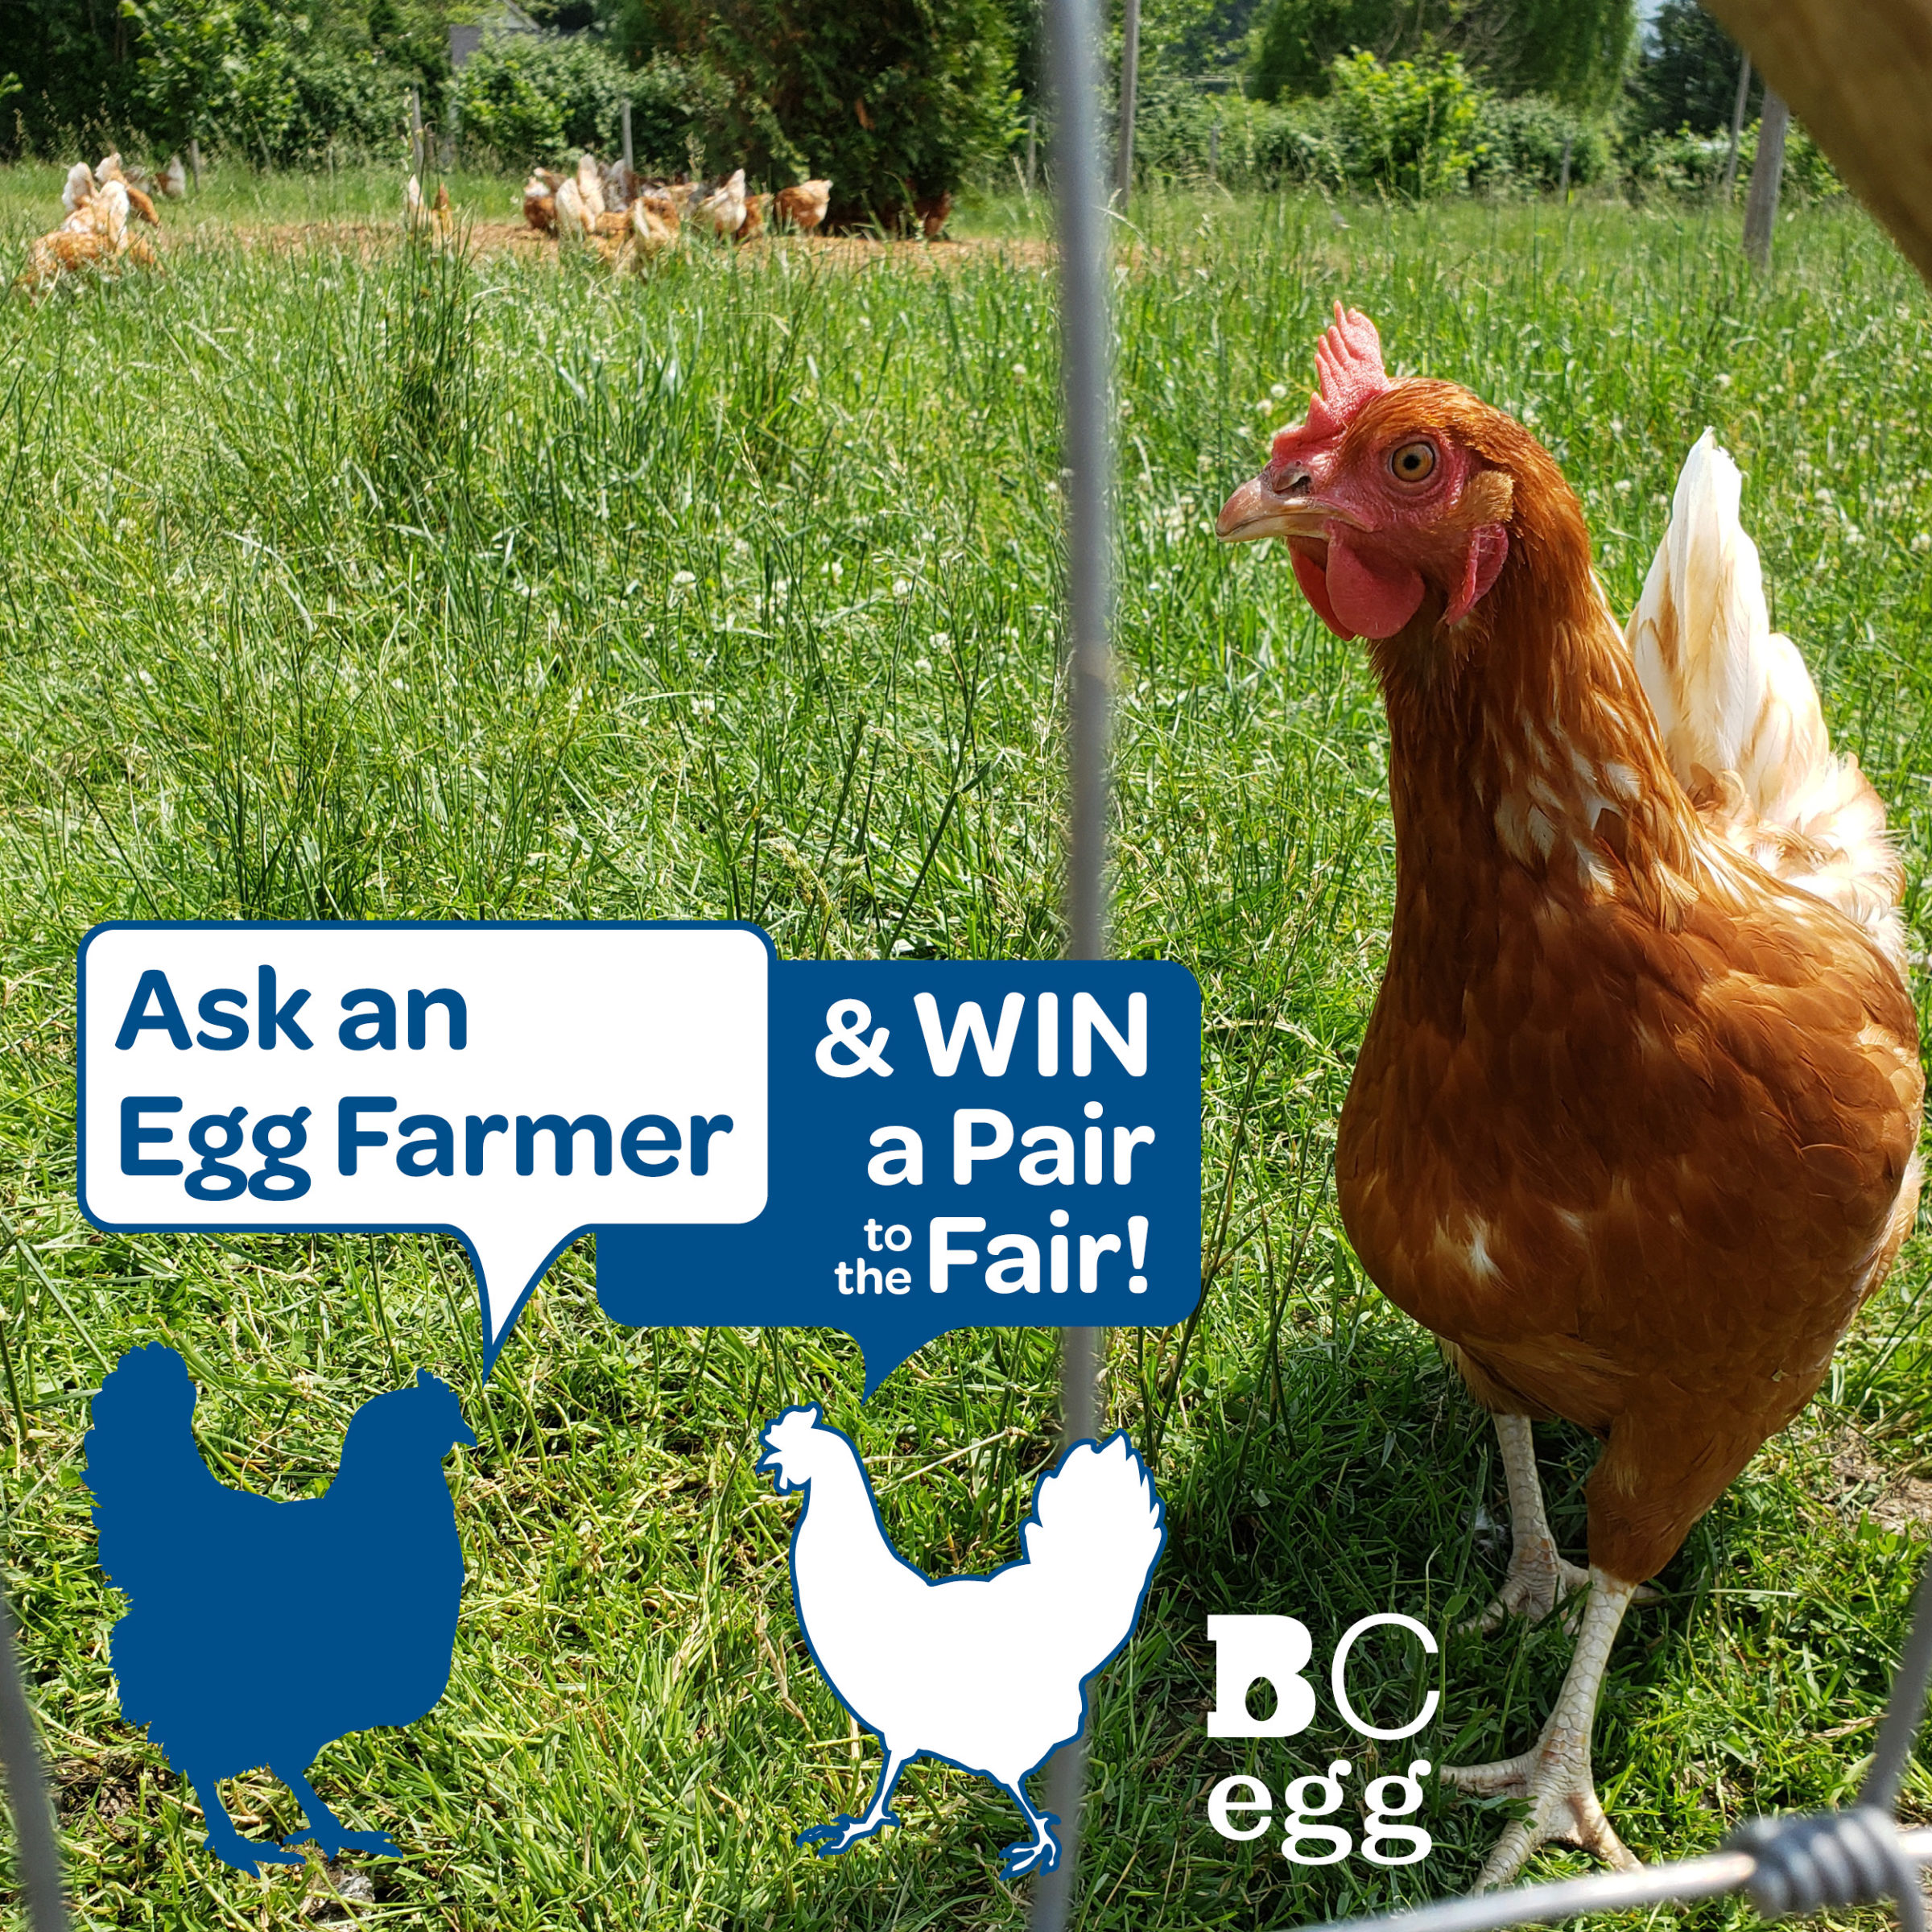 Ask and Egg Farmer organic brown hen outside in field